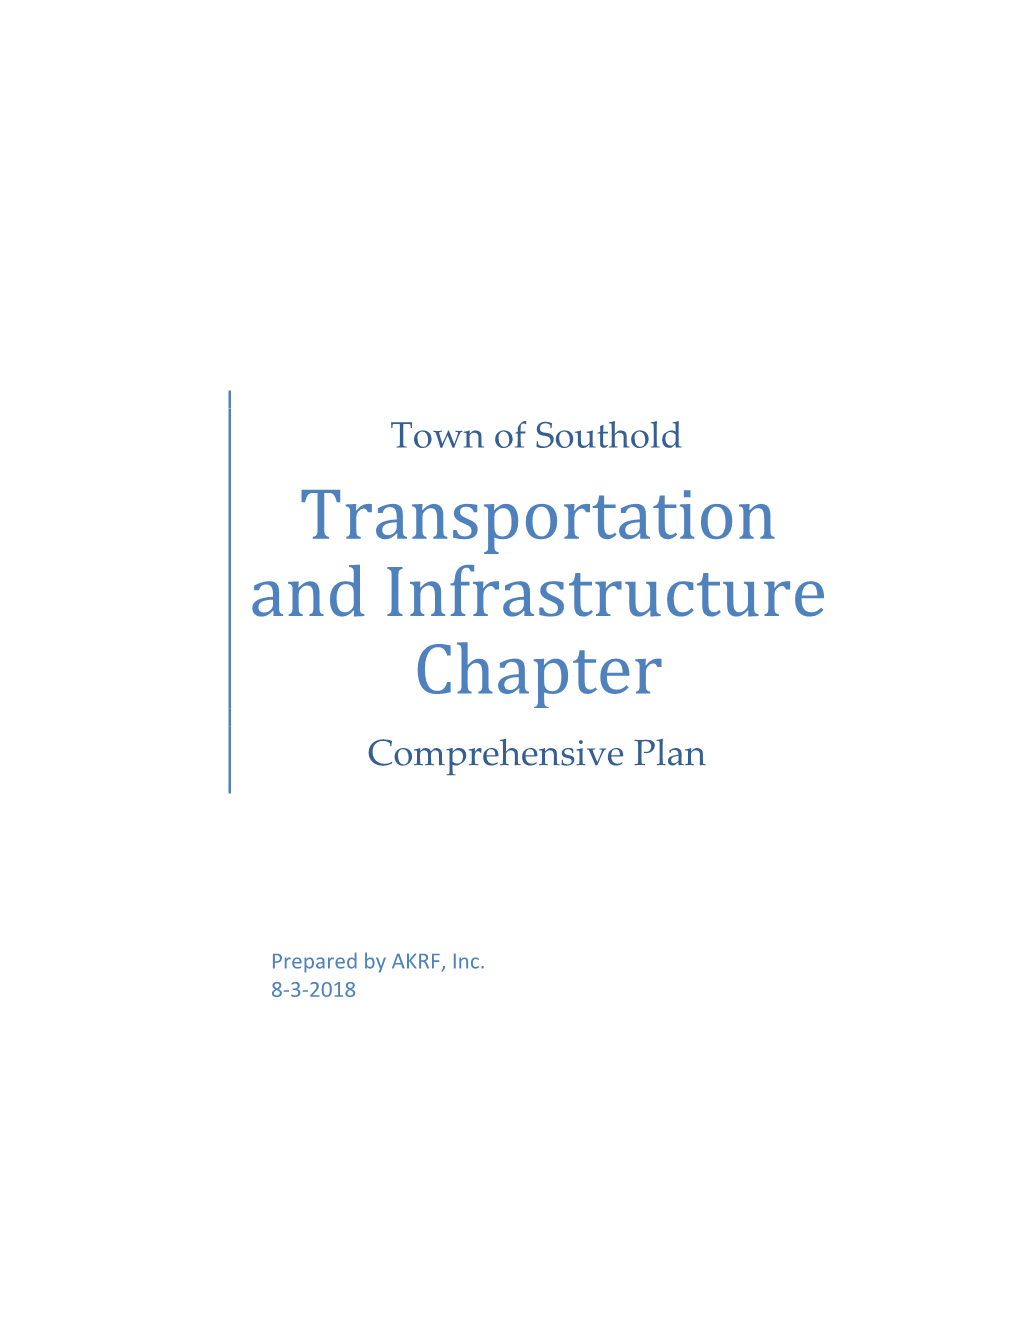 Transportation and Infrastructure Chapter Comprehensive Plan